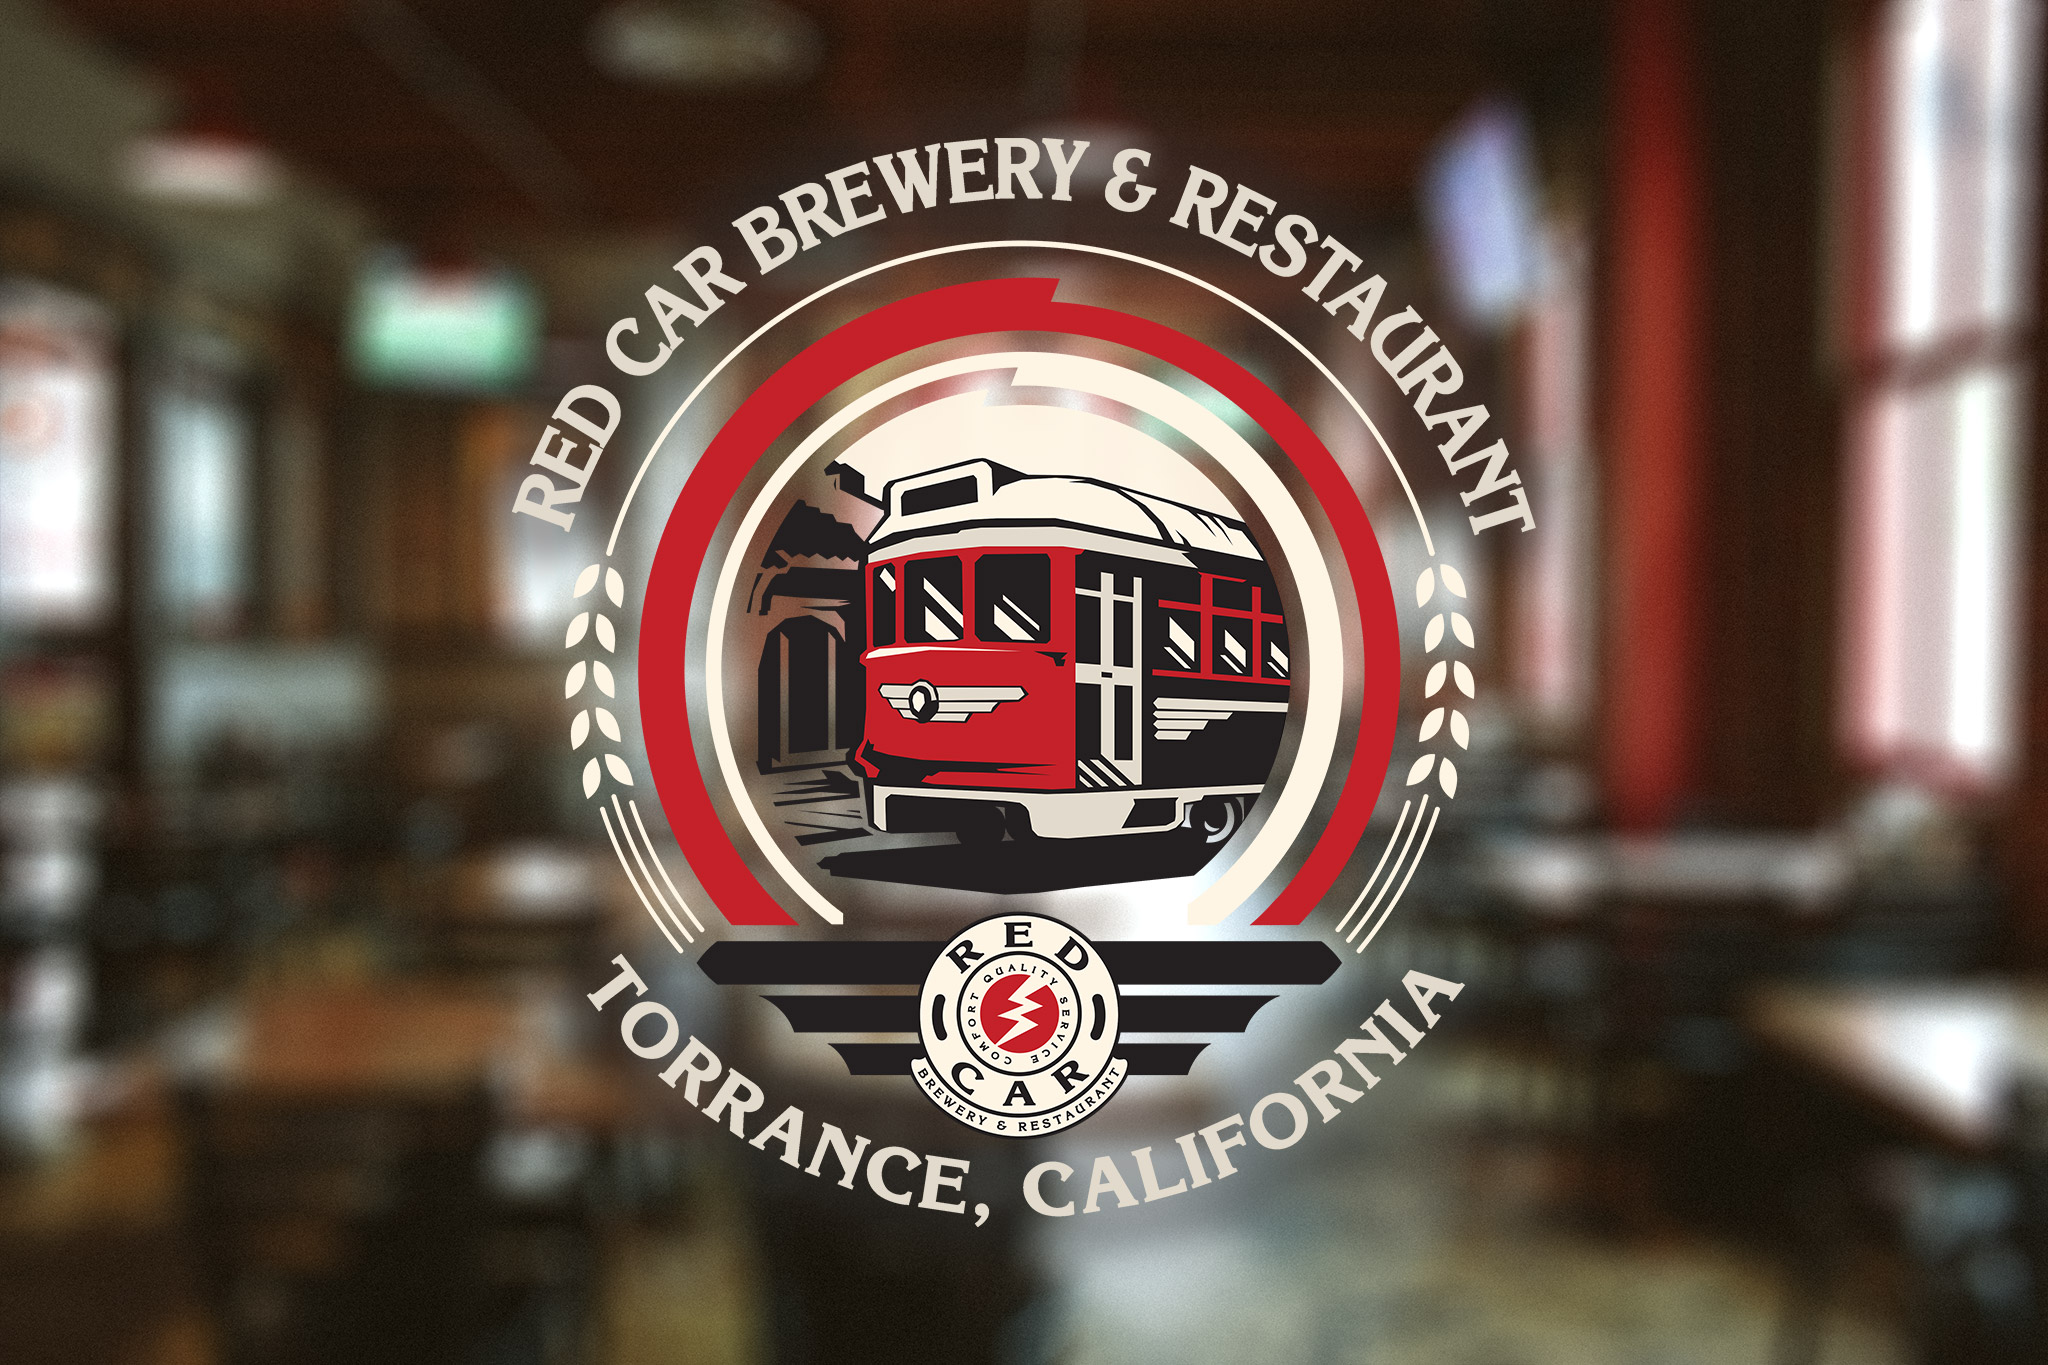 Red Car Brewery & Restaurant | Torrance, South Bay